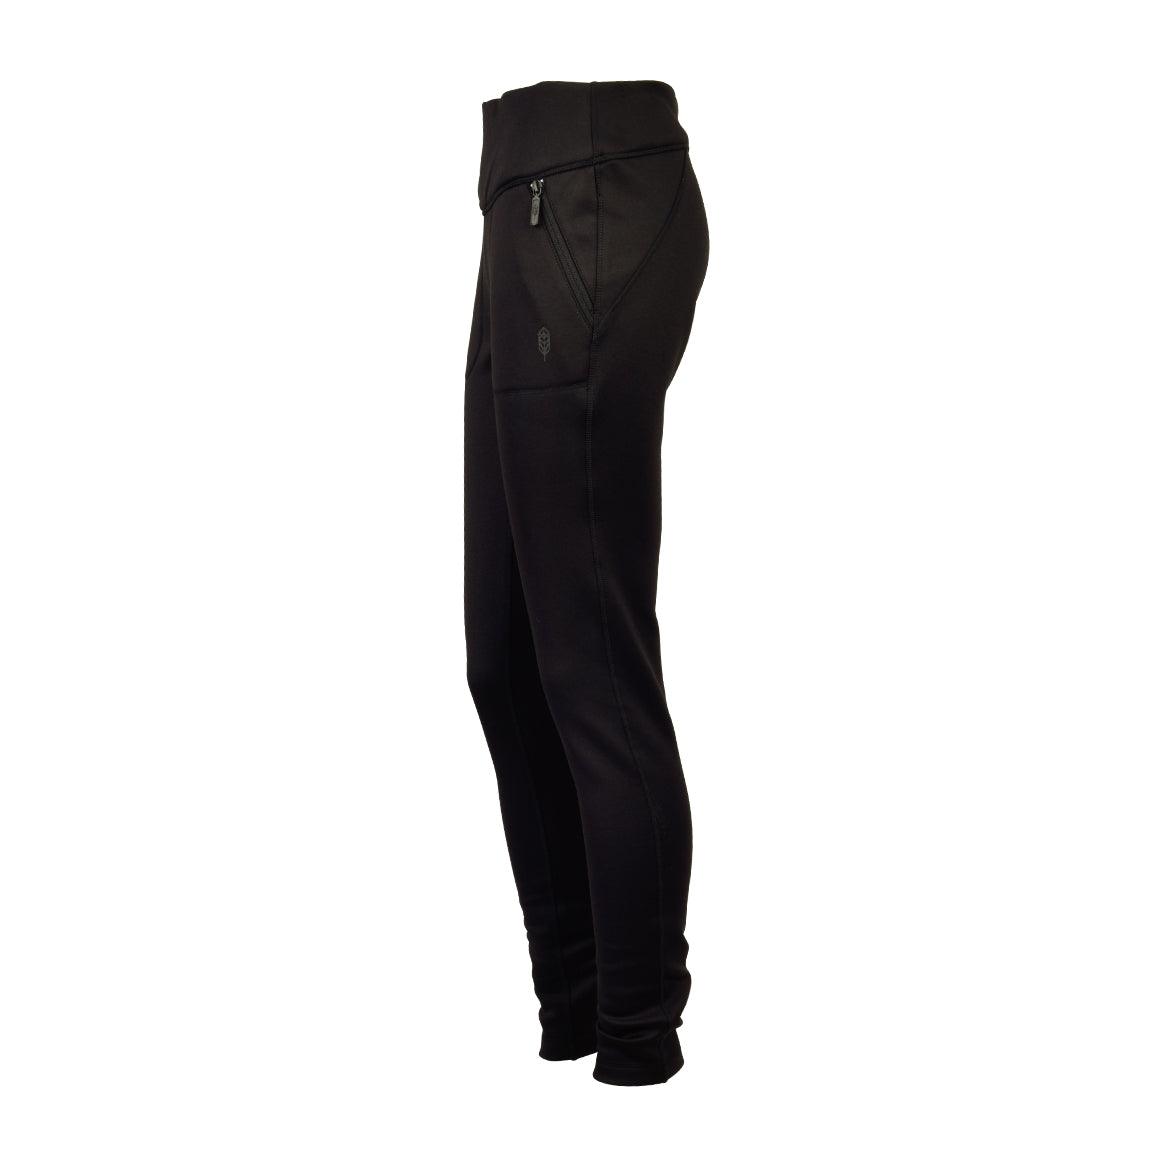 Teplo Women's Pants - Sports Excellence